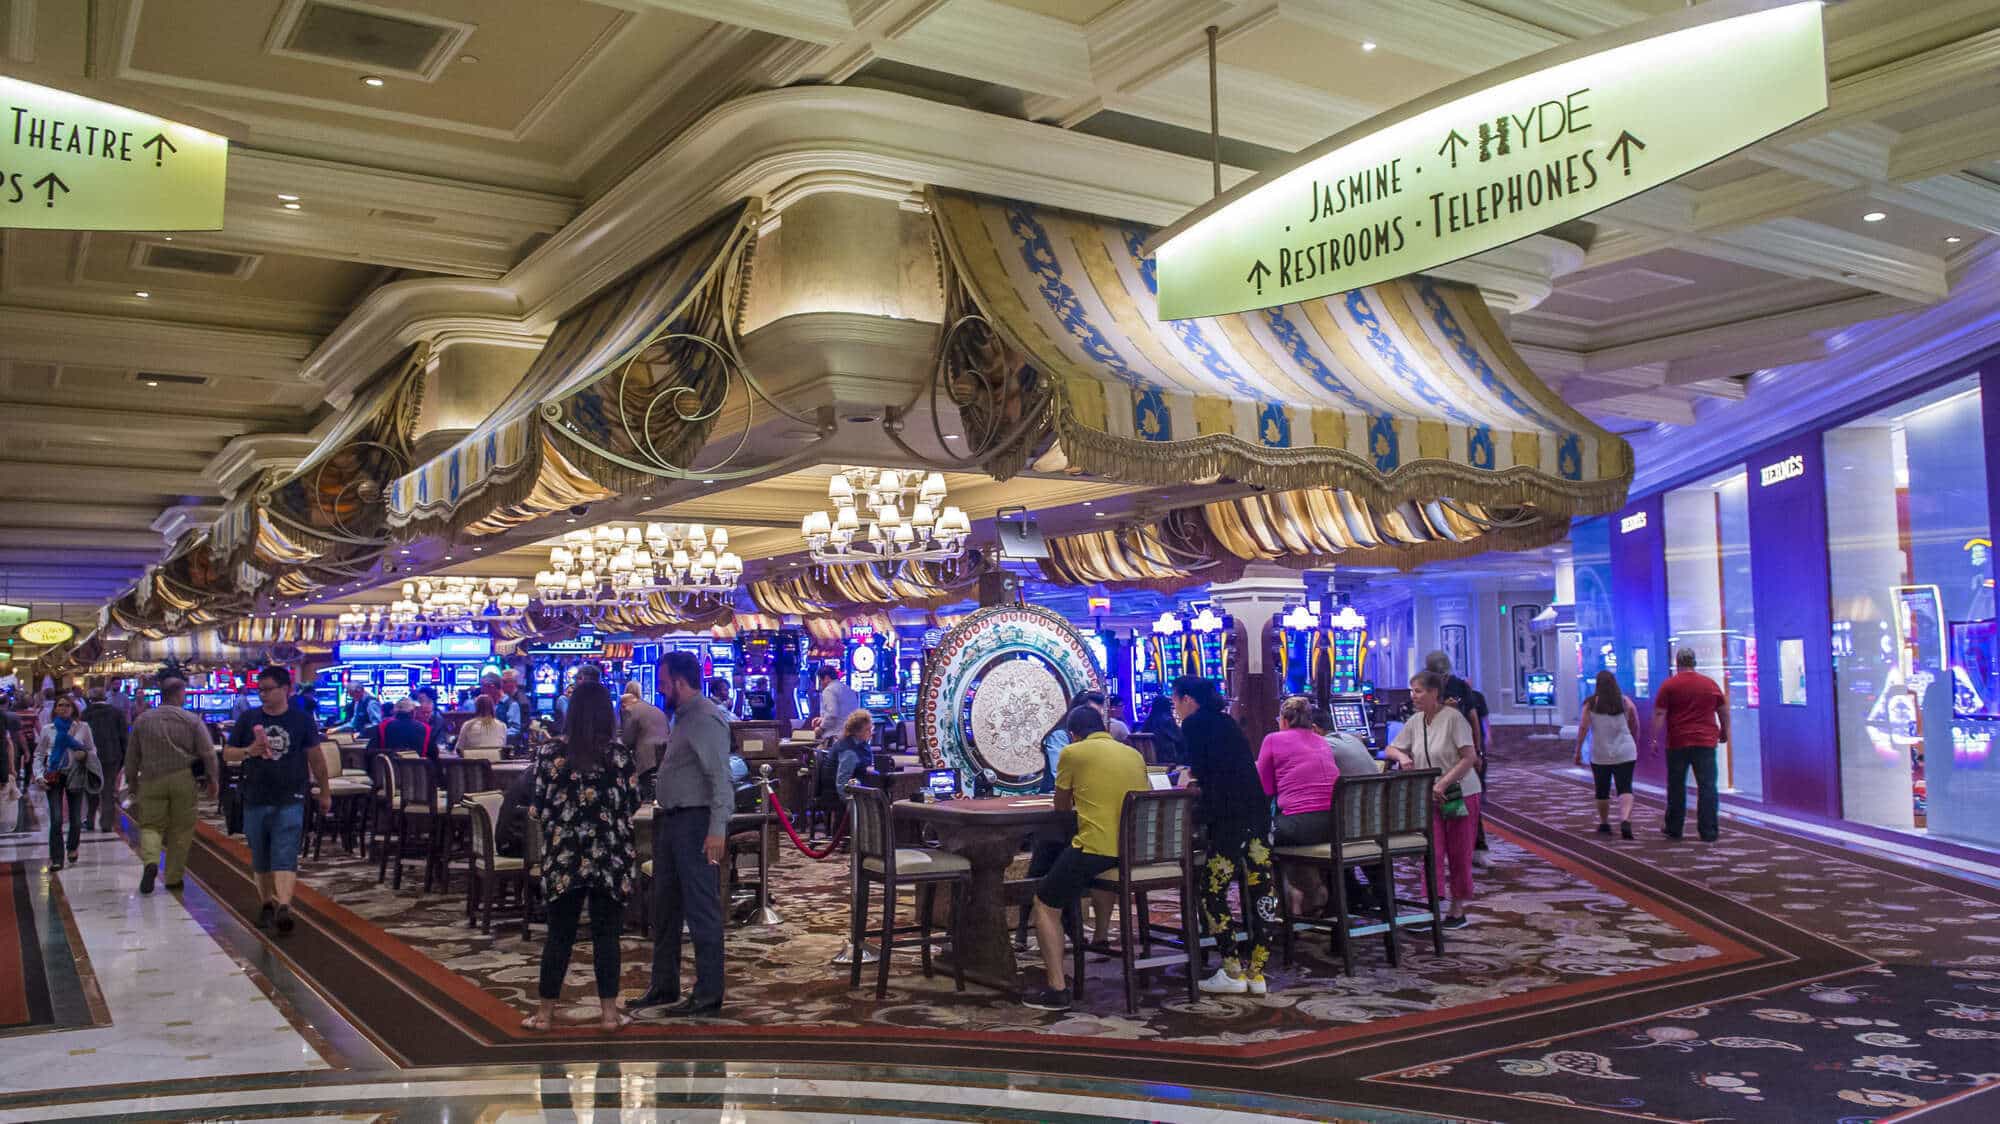 View of the Bellagio Casino floor in Las Vegas with lavish decor and gaming tables